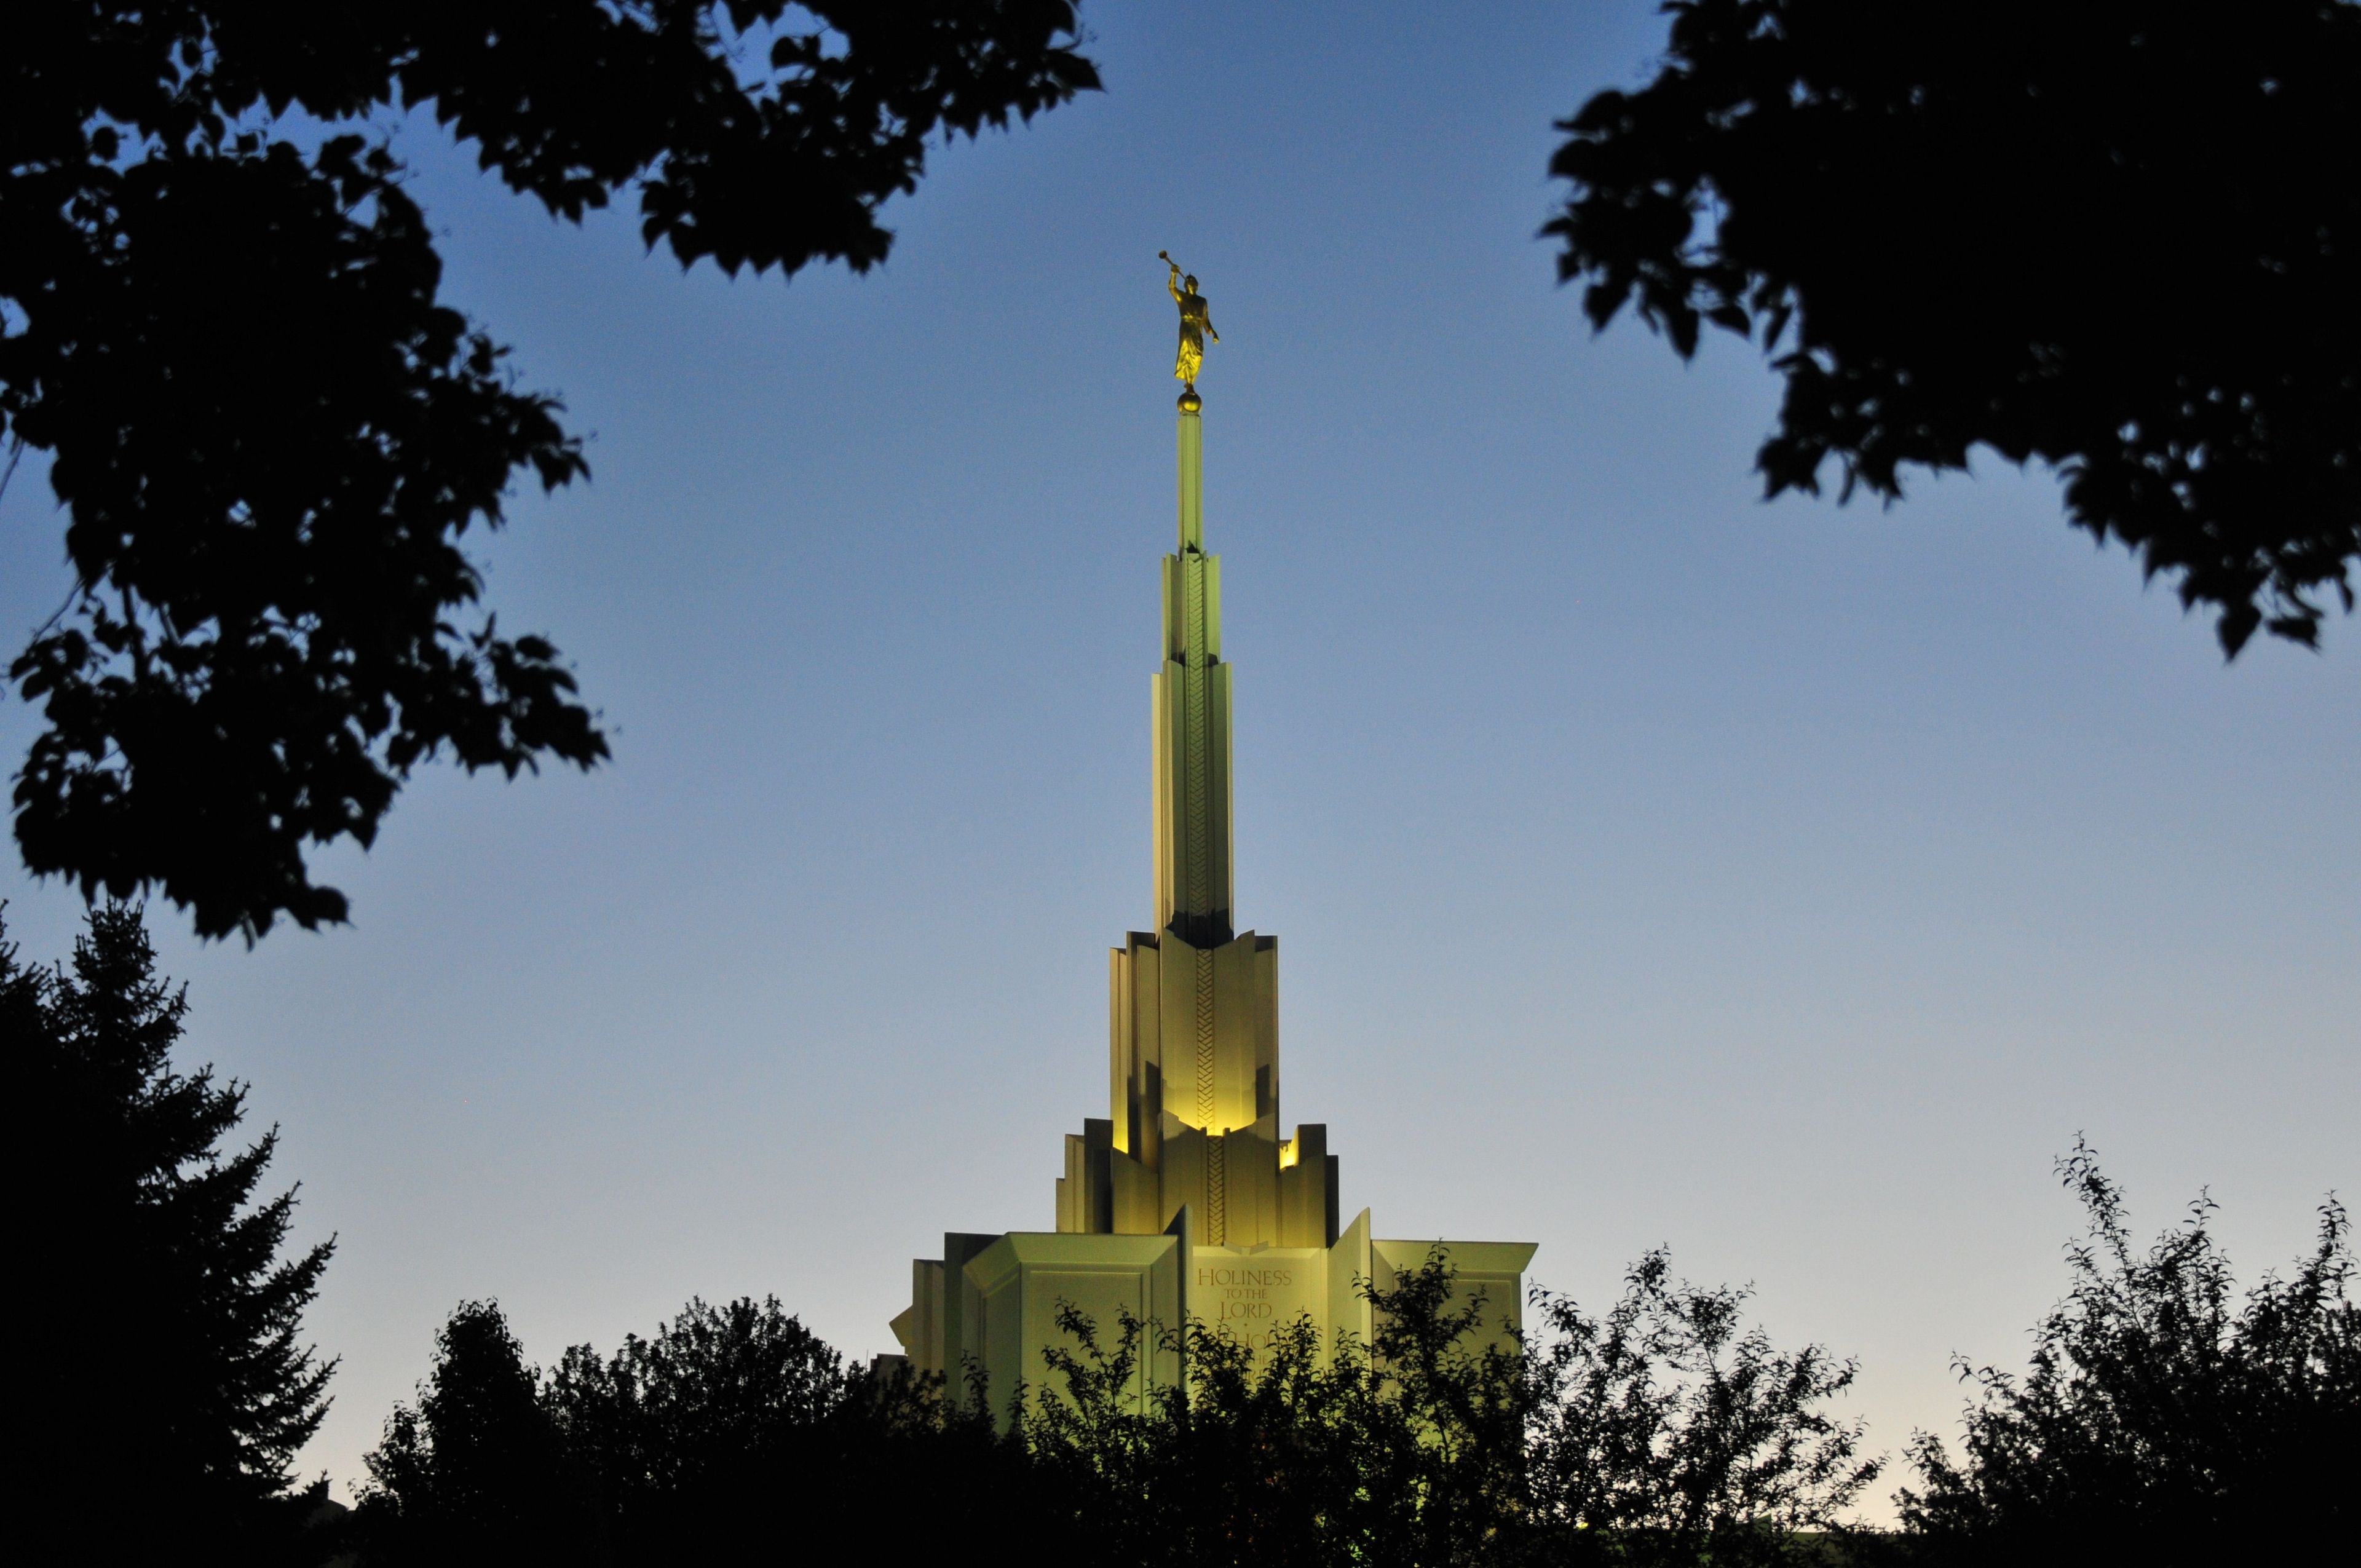 The spire of the Denver Colorado Temple is lit up at night.